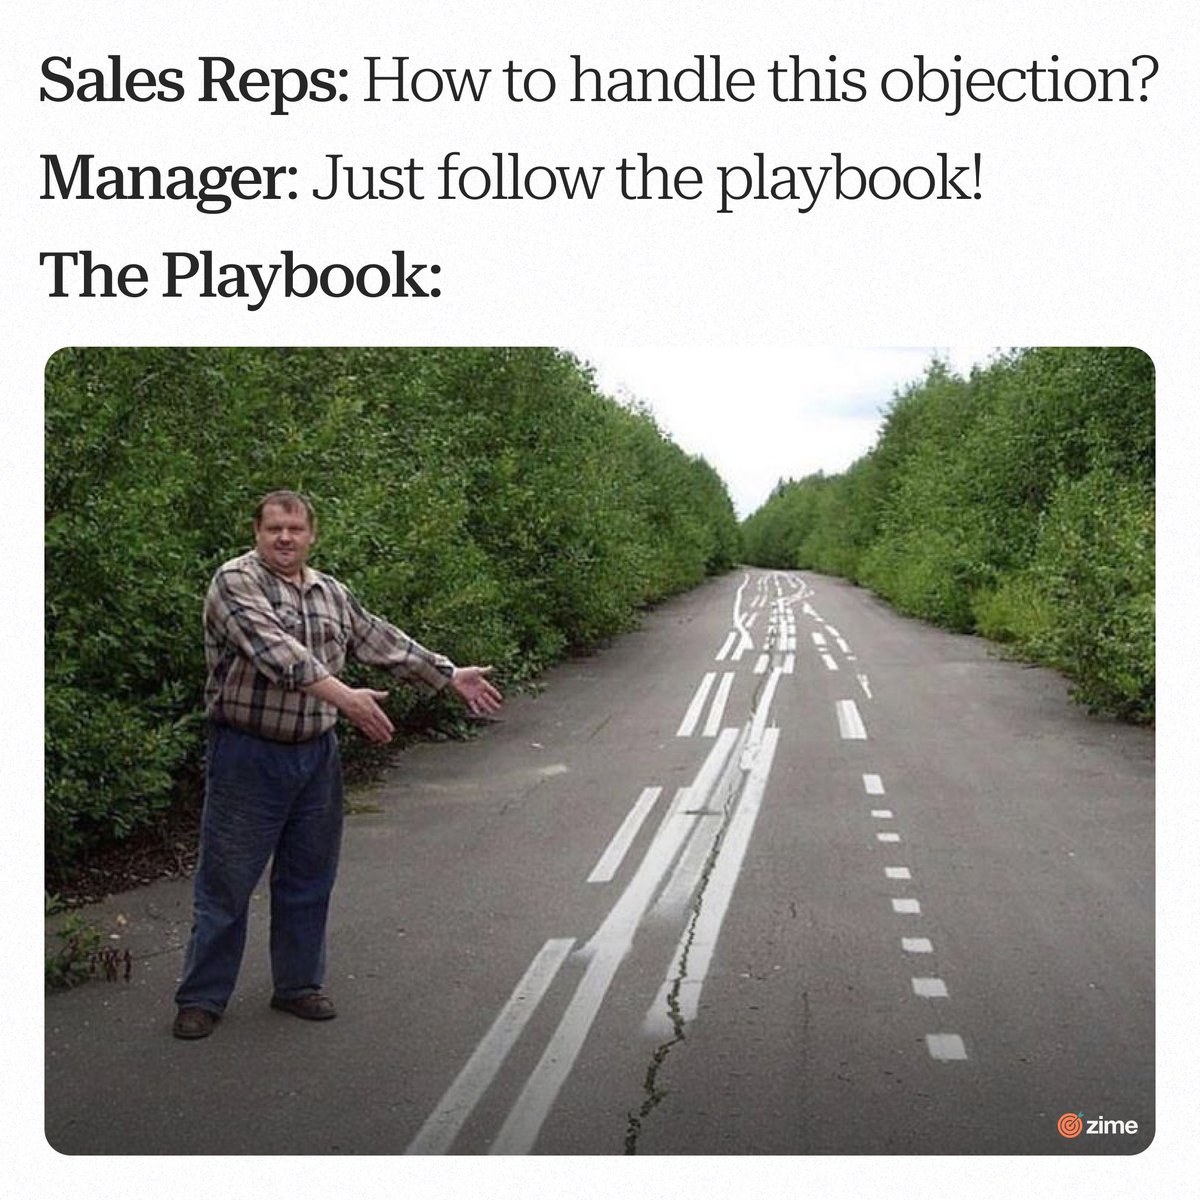 Sales reps hitting roadblocks with objections? Maybe it's time to rethink the playbook! Let's discuss at our event! Stay tuned.

#SalesStrategies #SalesManagement #SalesMeme